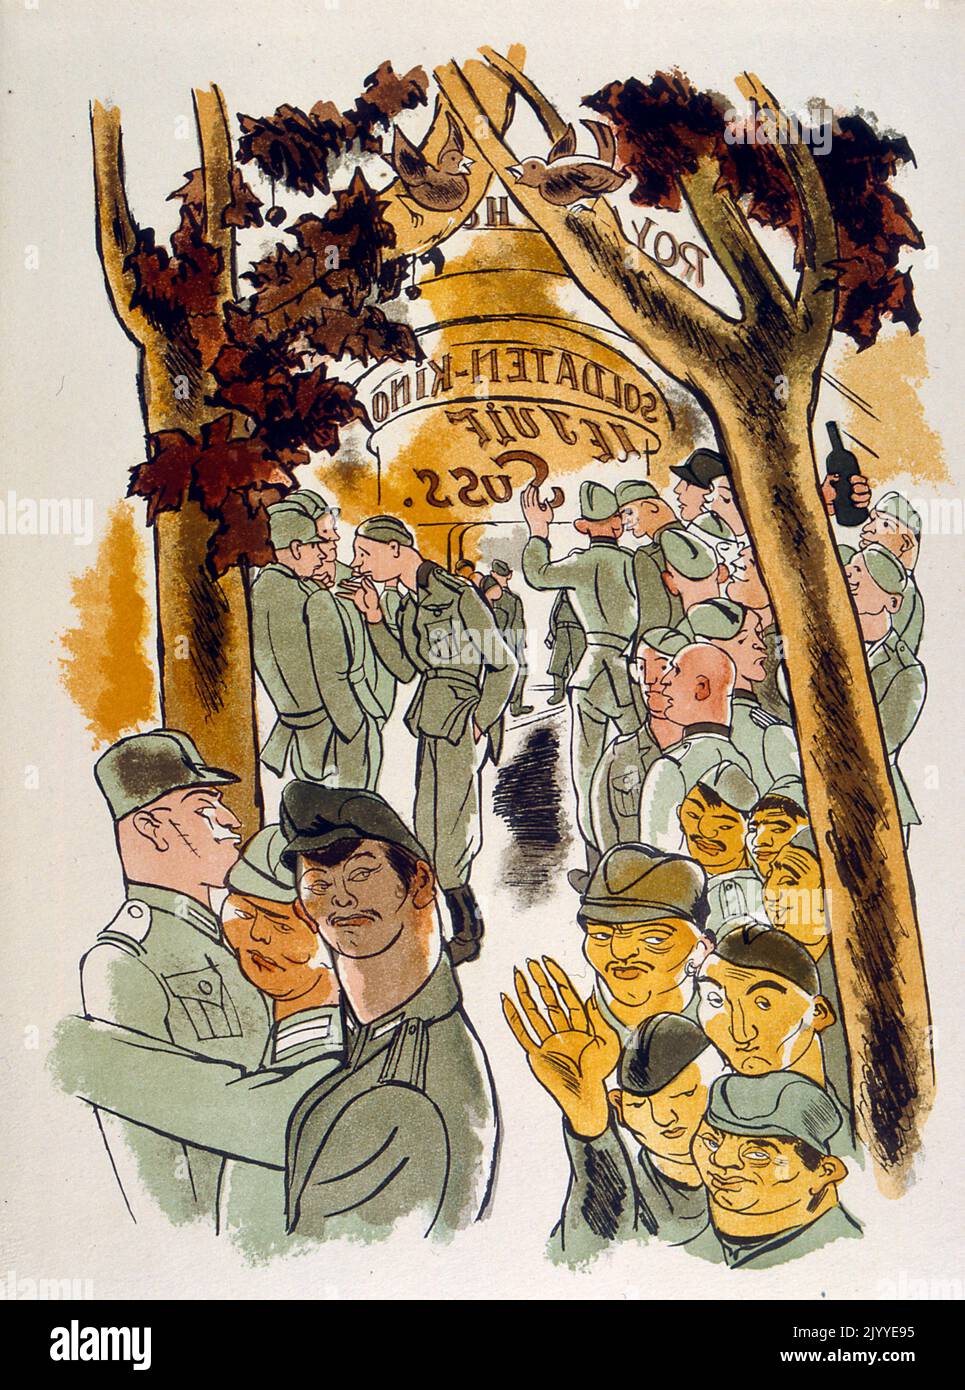 Coloured Illustration depicting soldiers gathered at a party with Vietnamese and French soldiers. Stock Photo